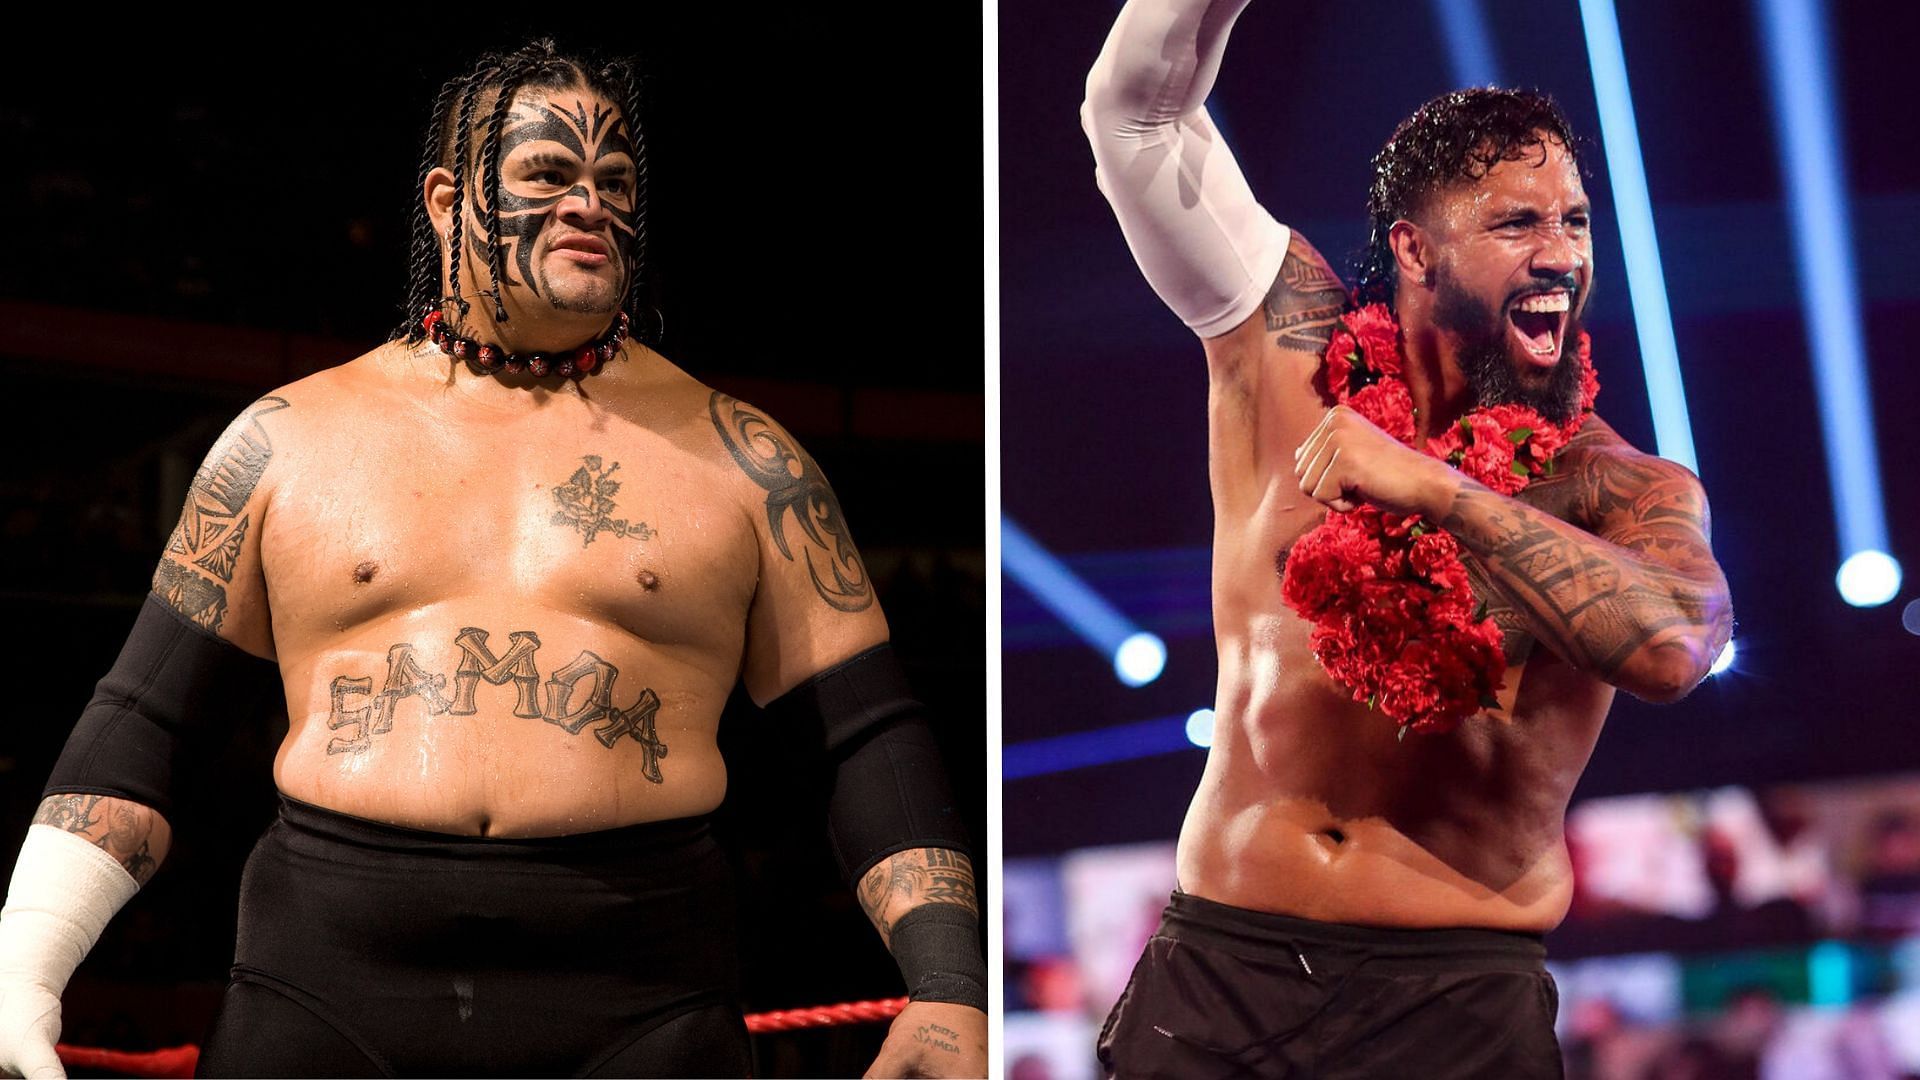 Jey Uso and Umaga are part of the Anoa